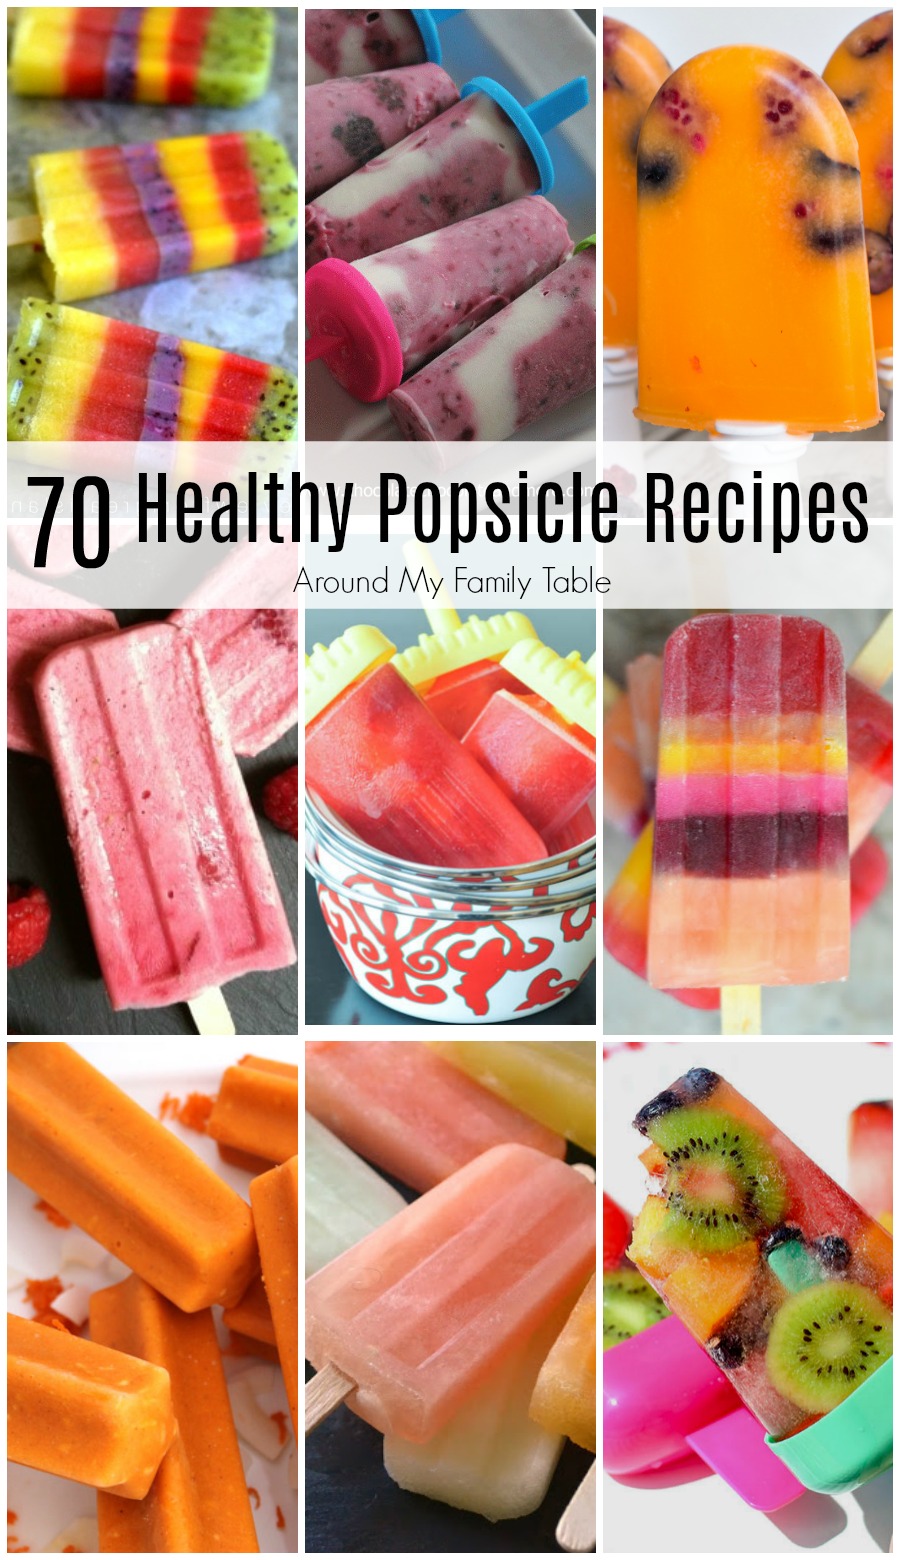 Popsicles are such a perfect treat on a hot day. It’s so easy to make your own at home with one of these Healthy Popsicle Recipes....there are over 70 on this list!